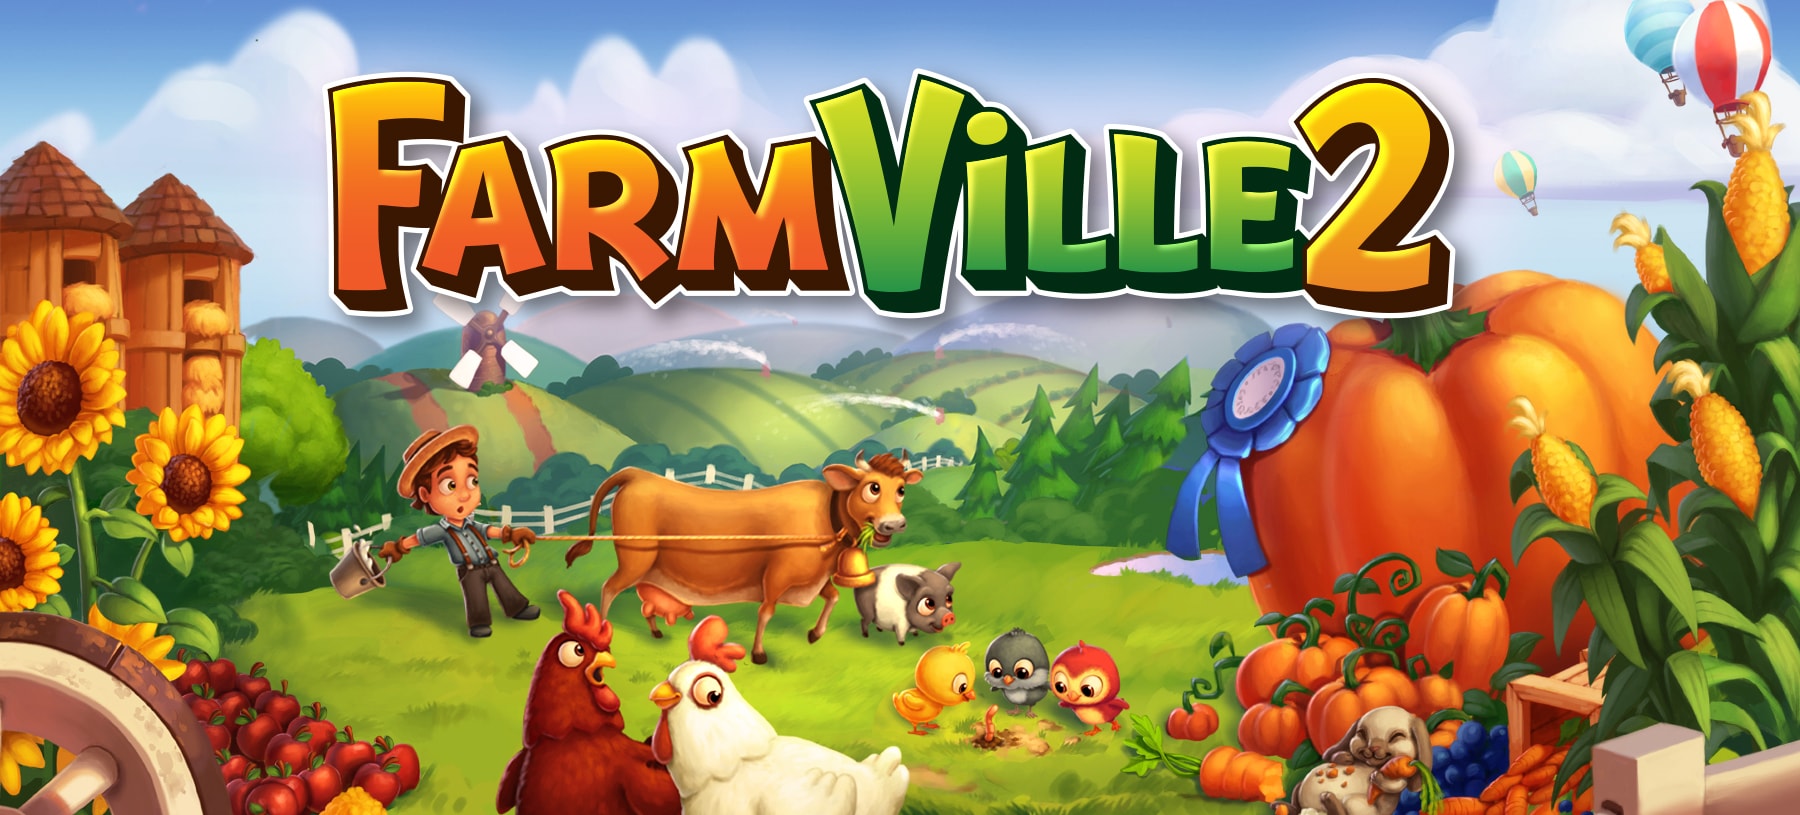 farm village game free download for pc